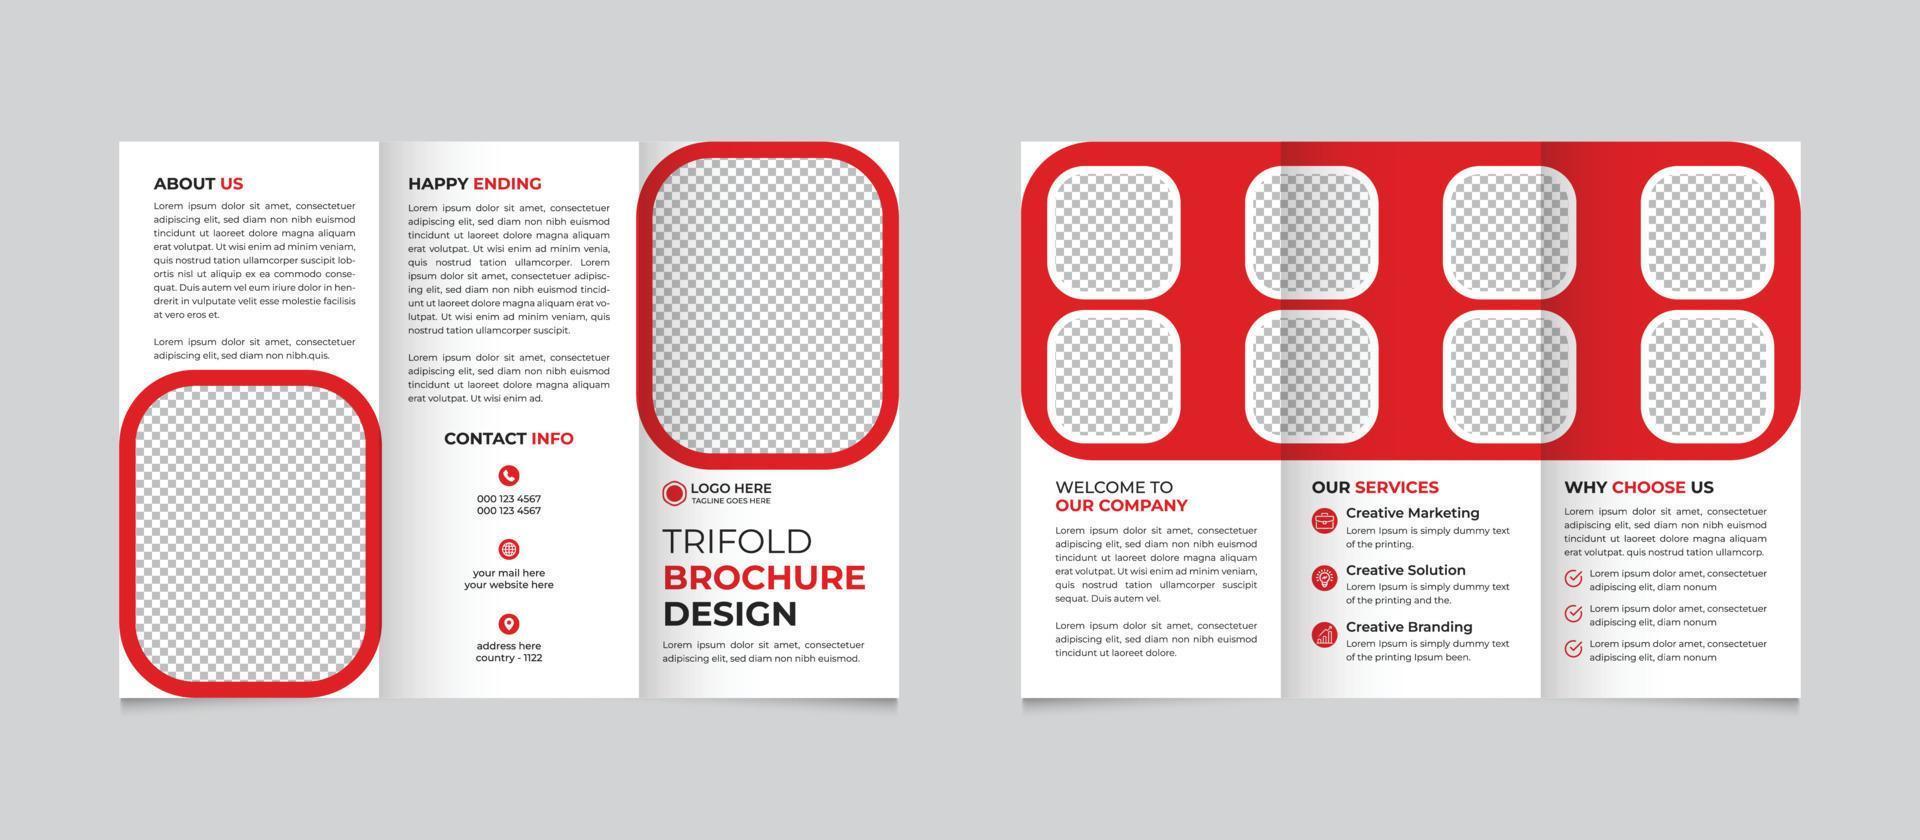 Modern, Creative, and Professional trifold brochure design template Free Vector